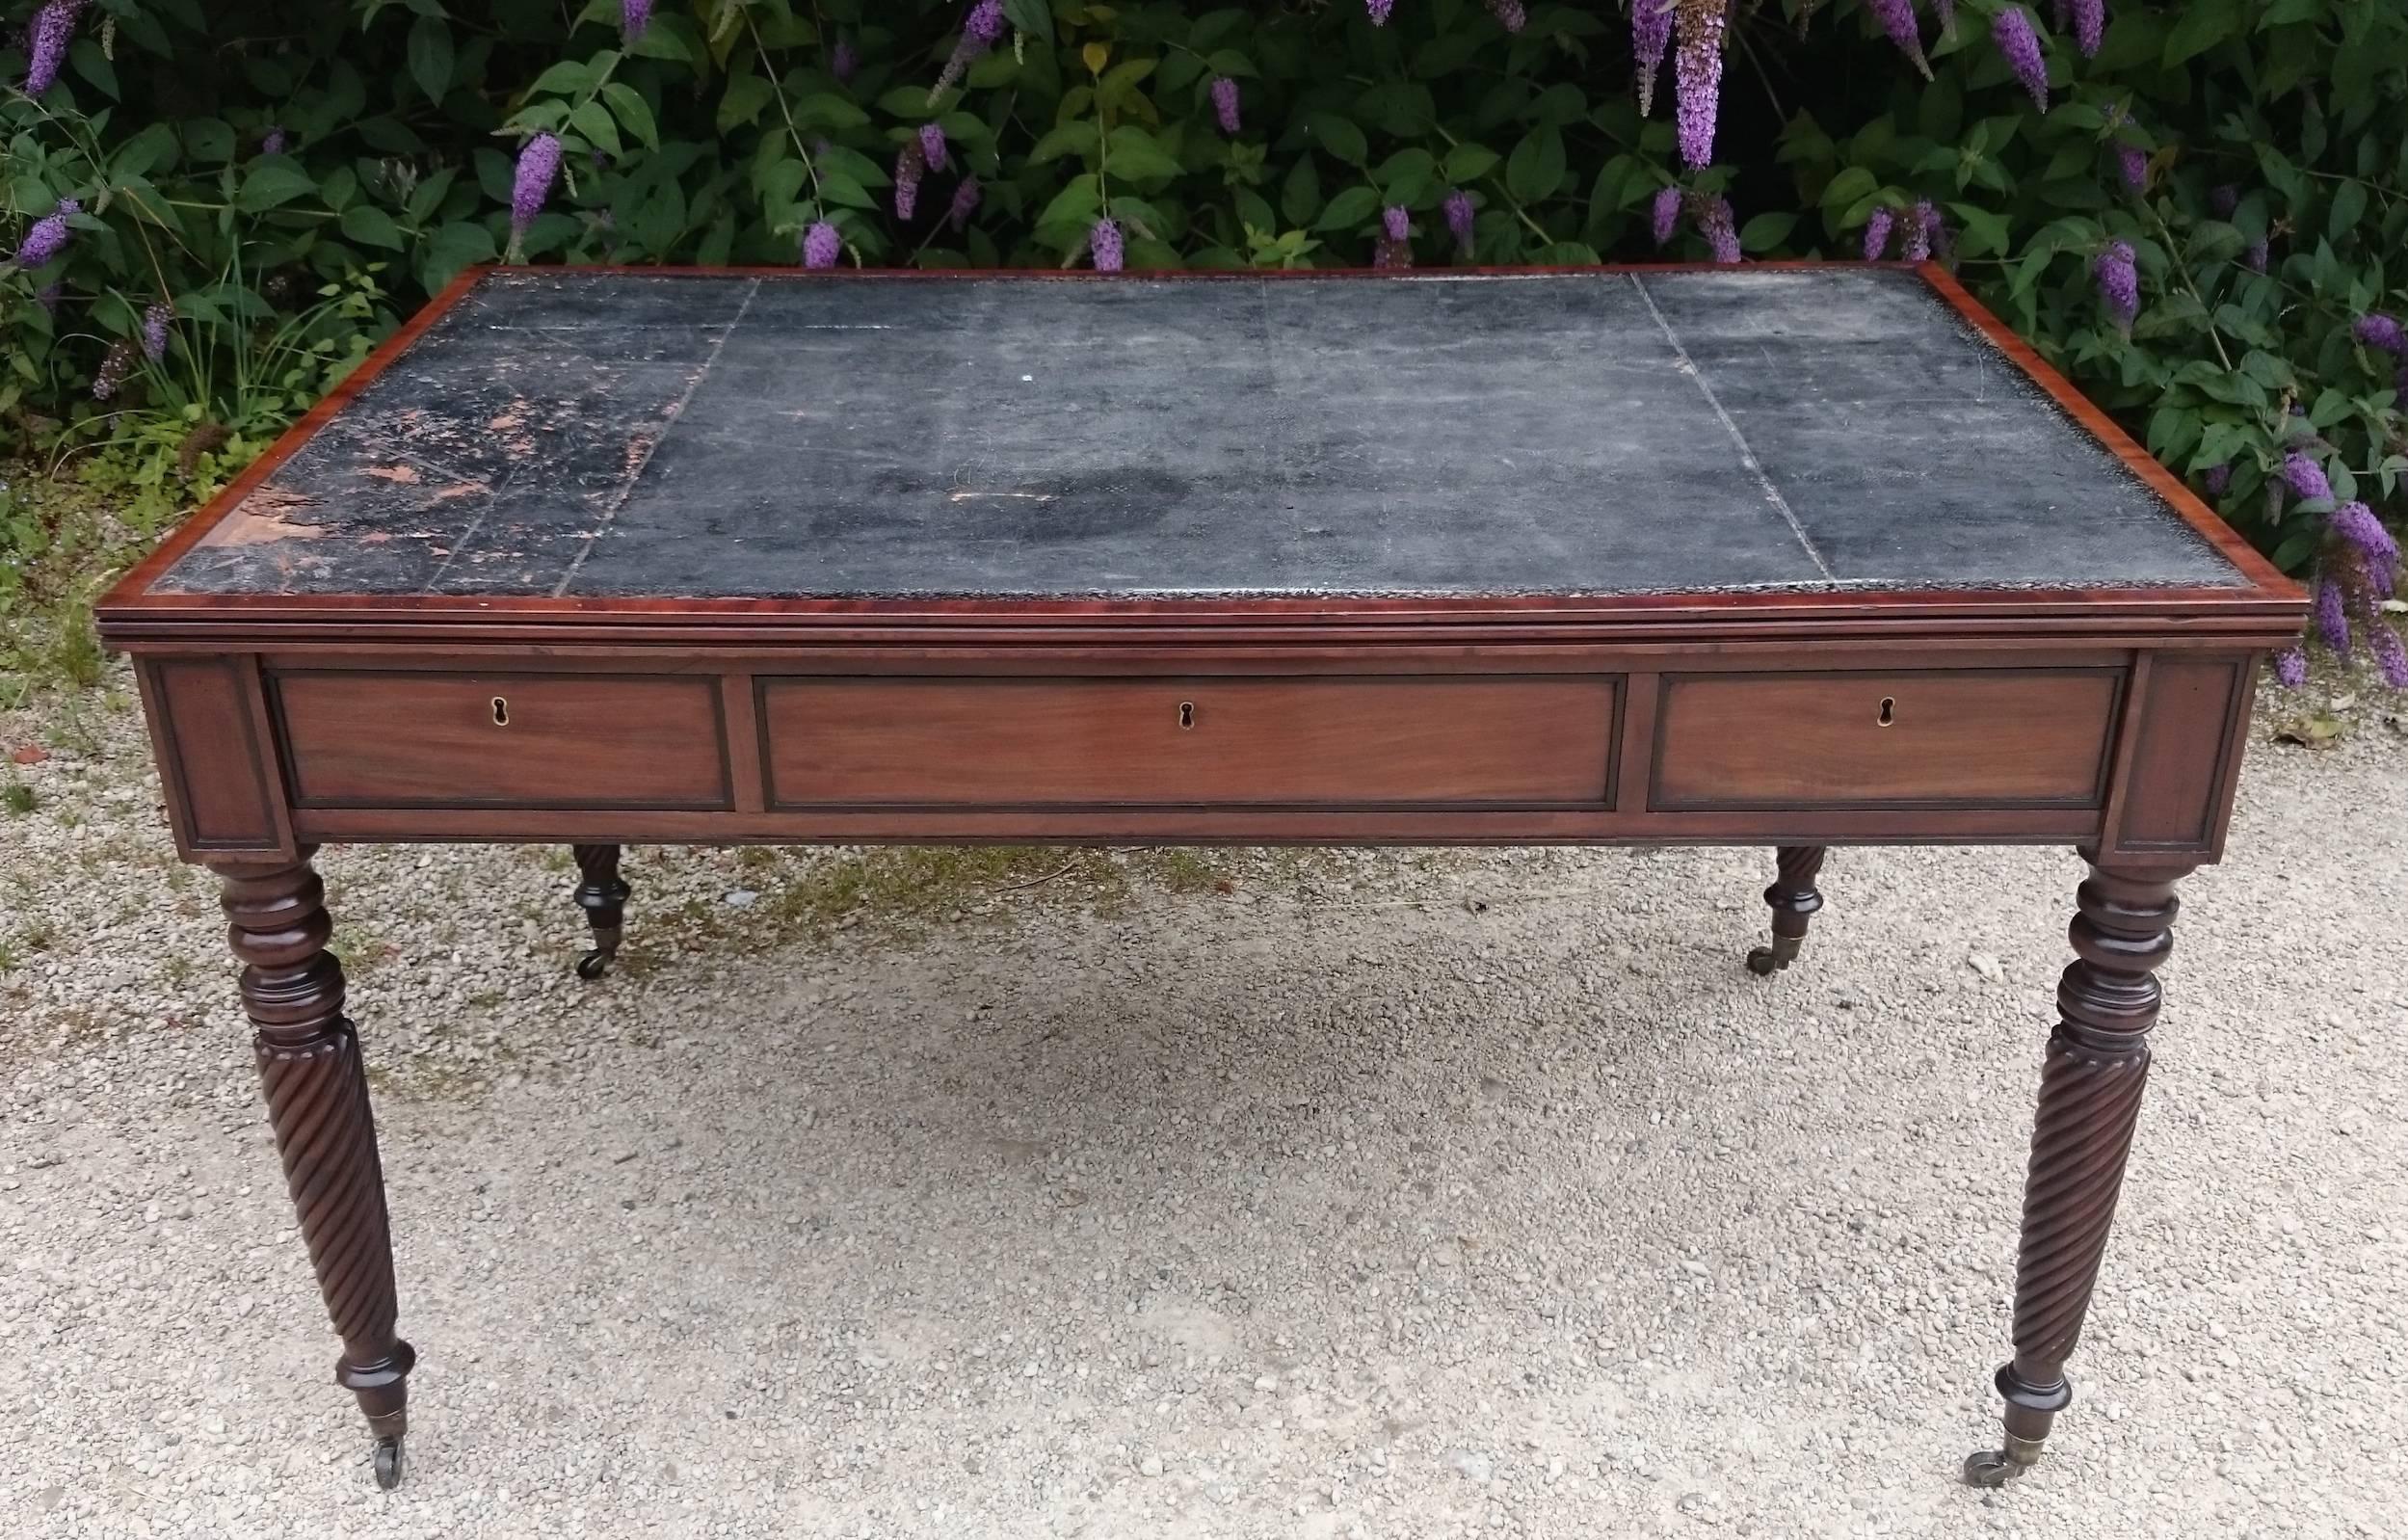 Antique Regency period mahogany library table or writing table standing on turned legs with brass casters and caps and rope twist decoration typical of the Regency period. This is a useful desk as it is unusually high for the period which makes it